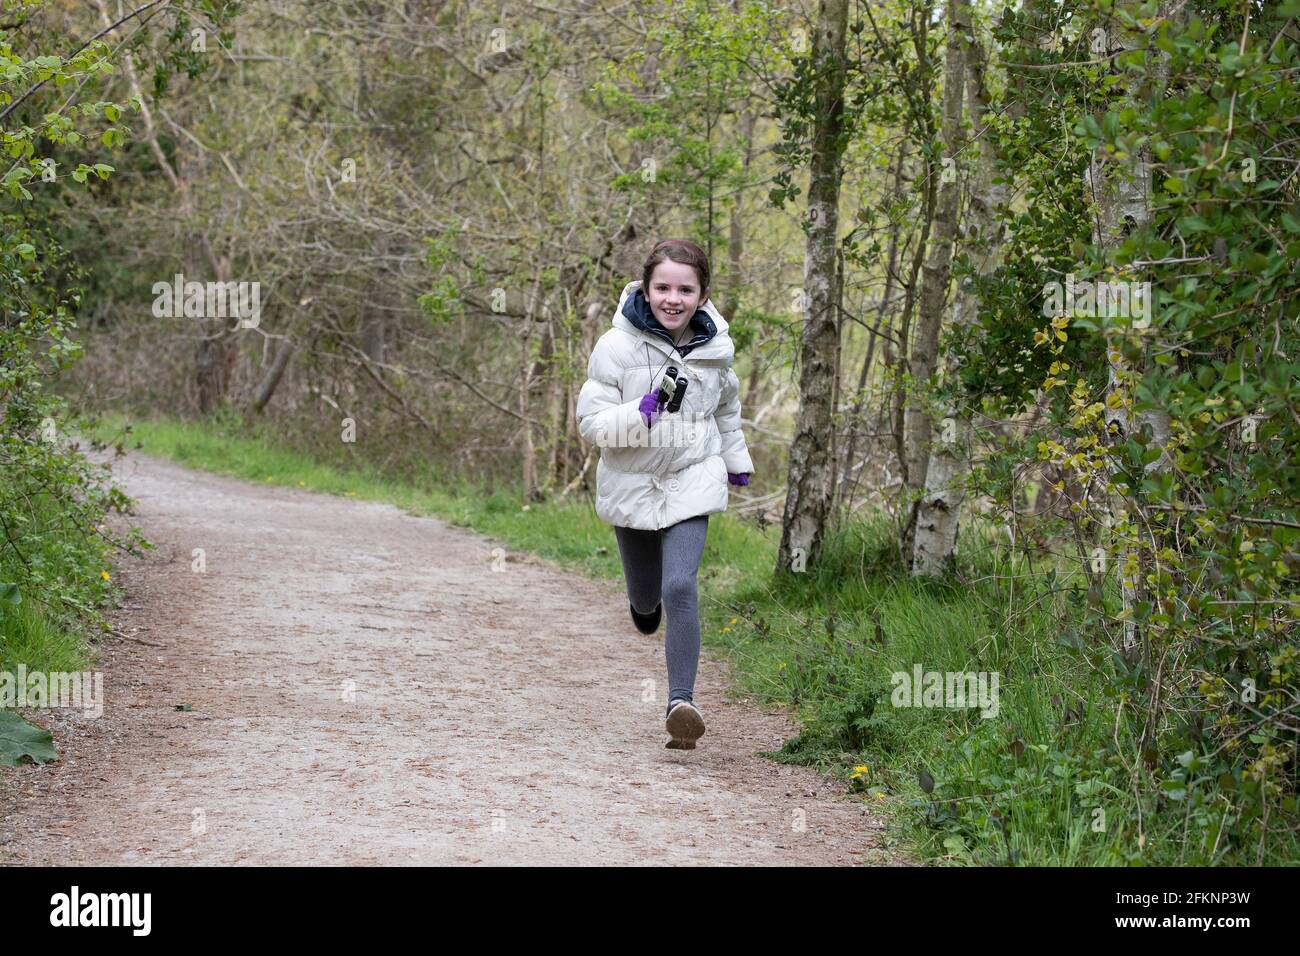 A young girl with binoculars around her neck runs down a tree lined path at RSPB Fairburn Ings, Nature Reserve,Yorkshire U.K. Stock Photo